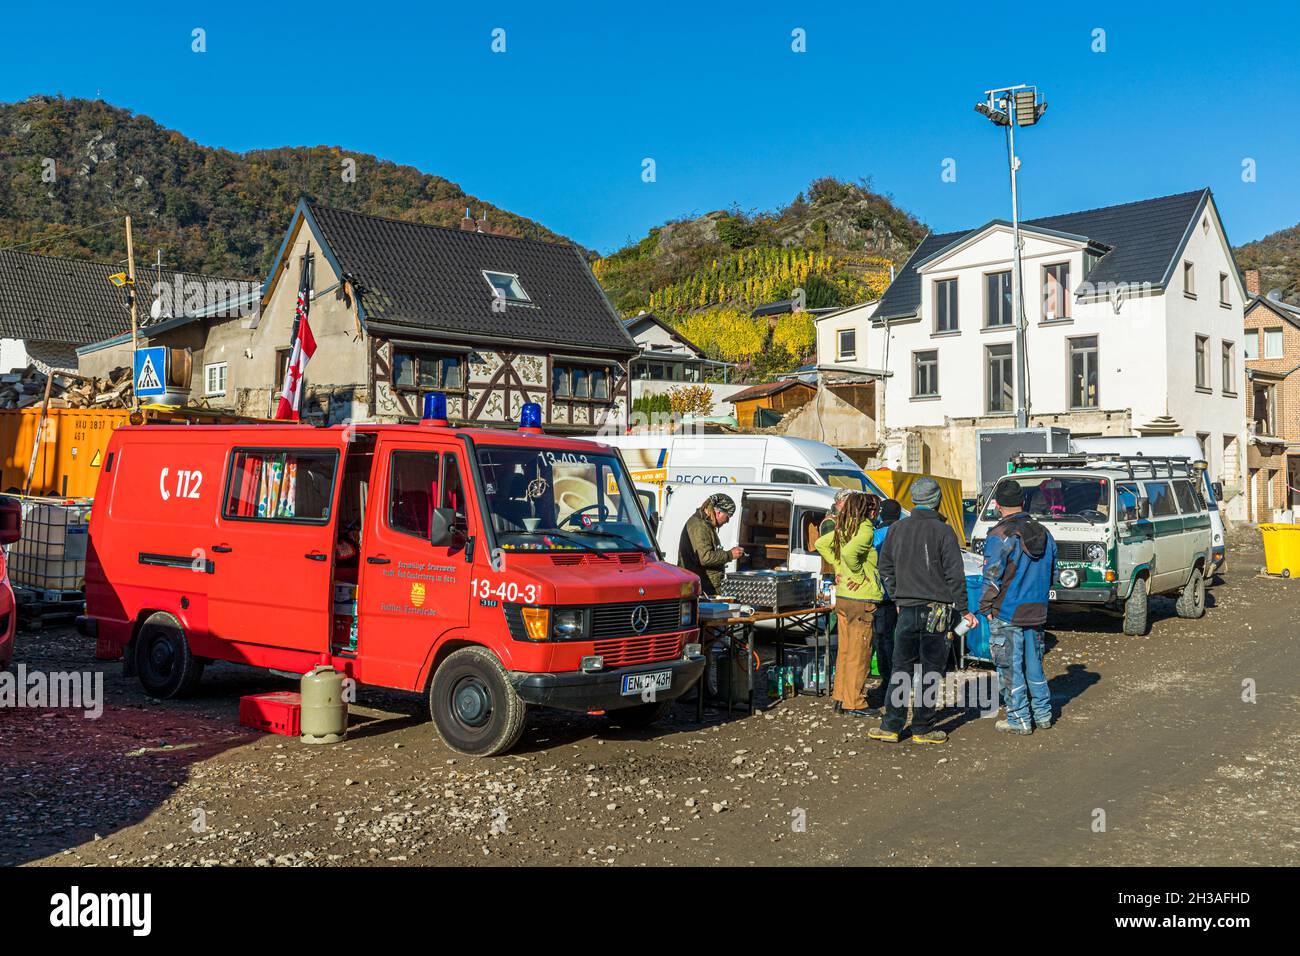 Flood disaster in 2021 in the Ahr valley, Mayschoß, Germany. A group of volunteer firefighters has come from another part of Germany to help feed the villagers Stock Photo